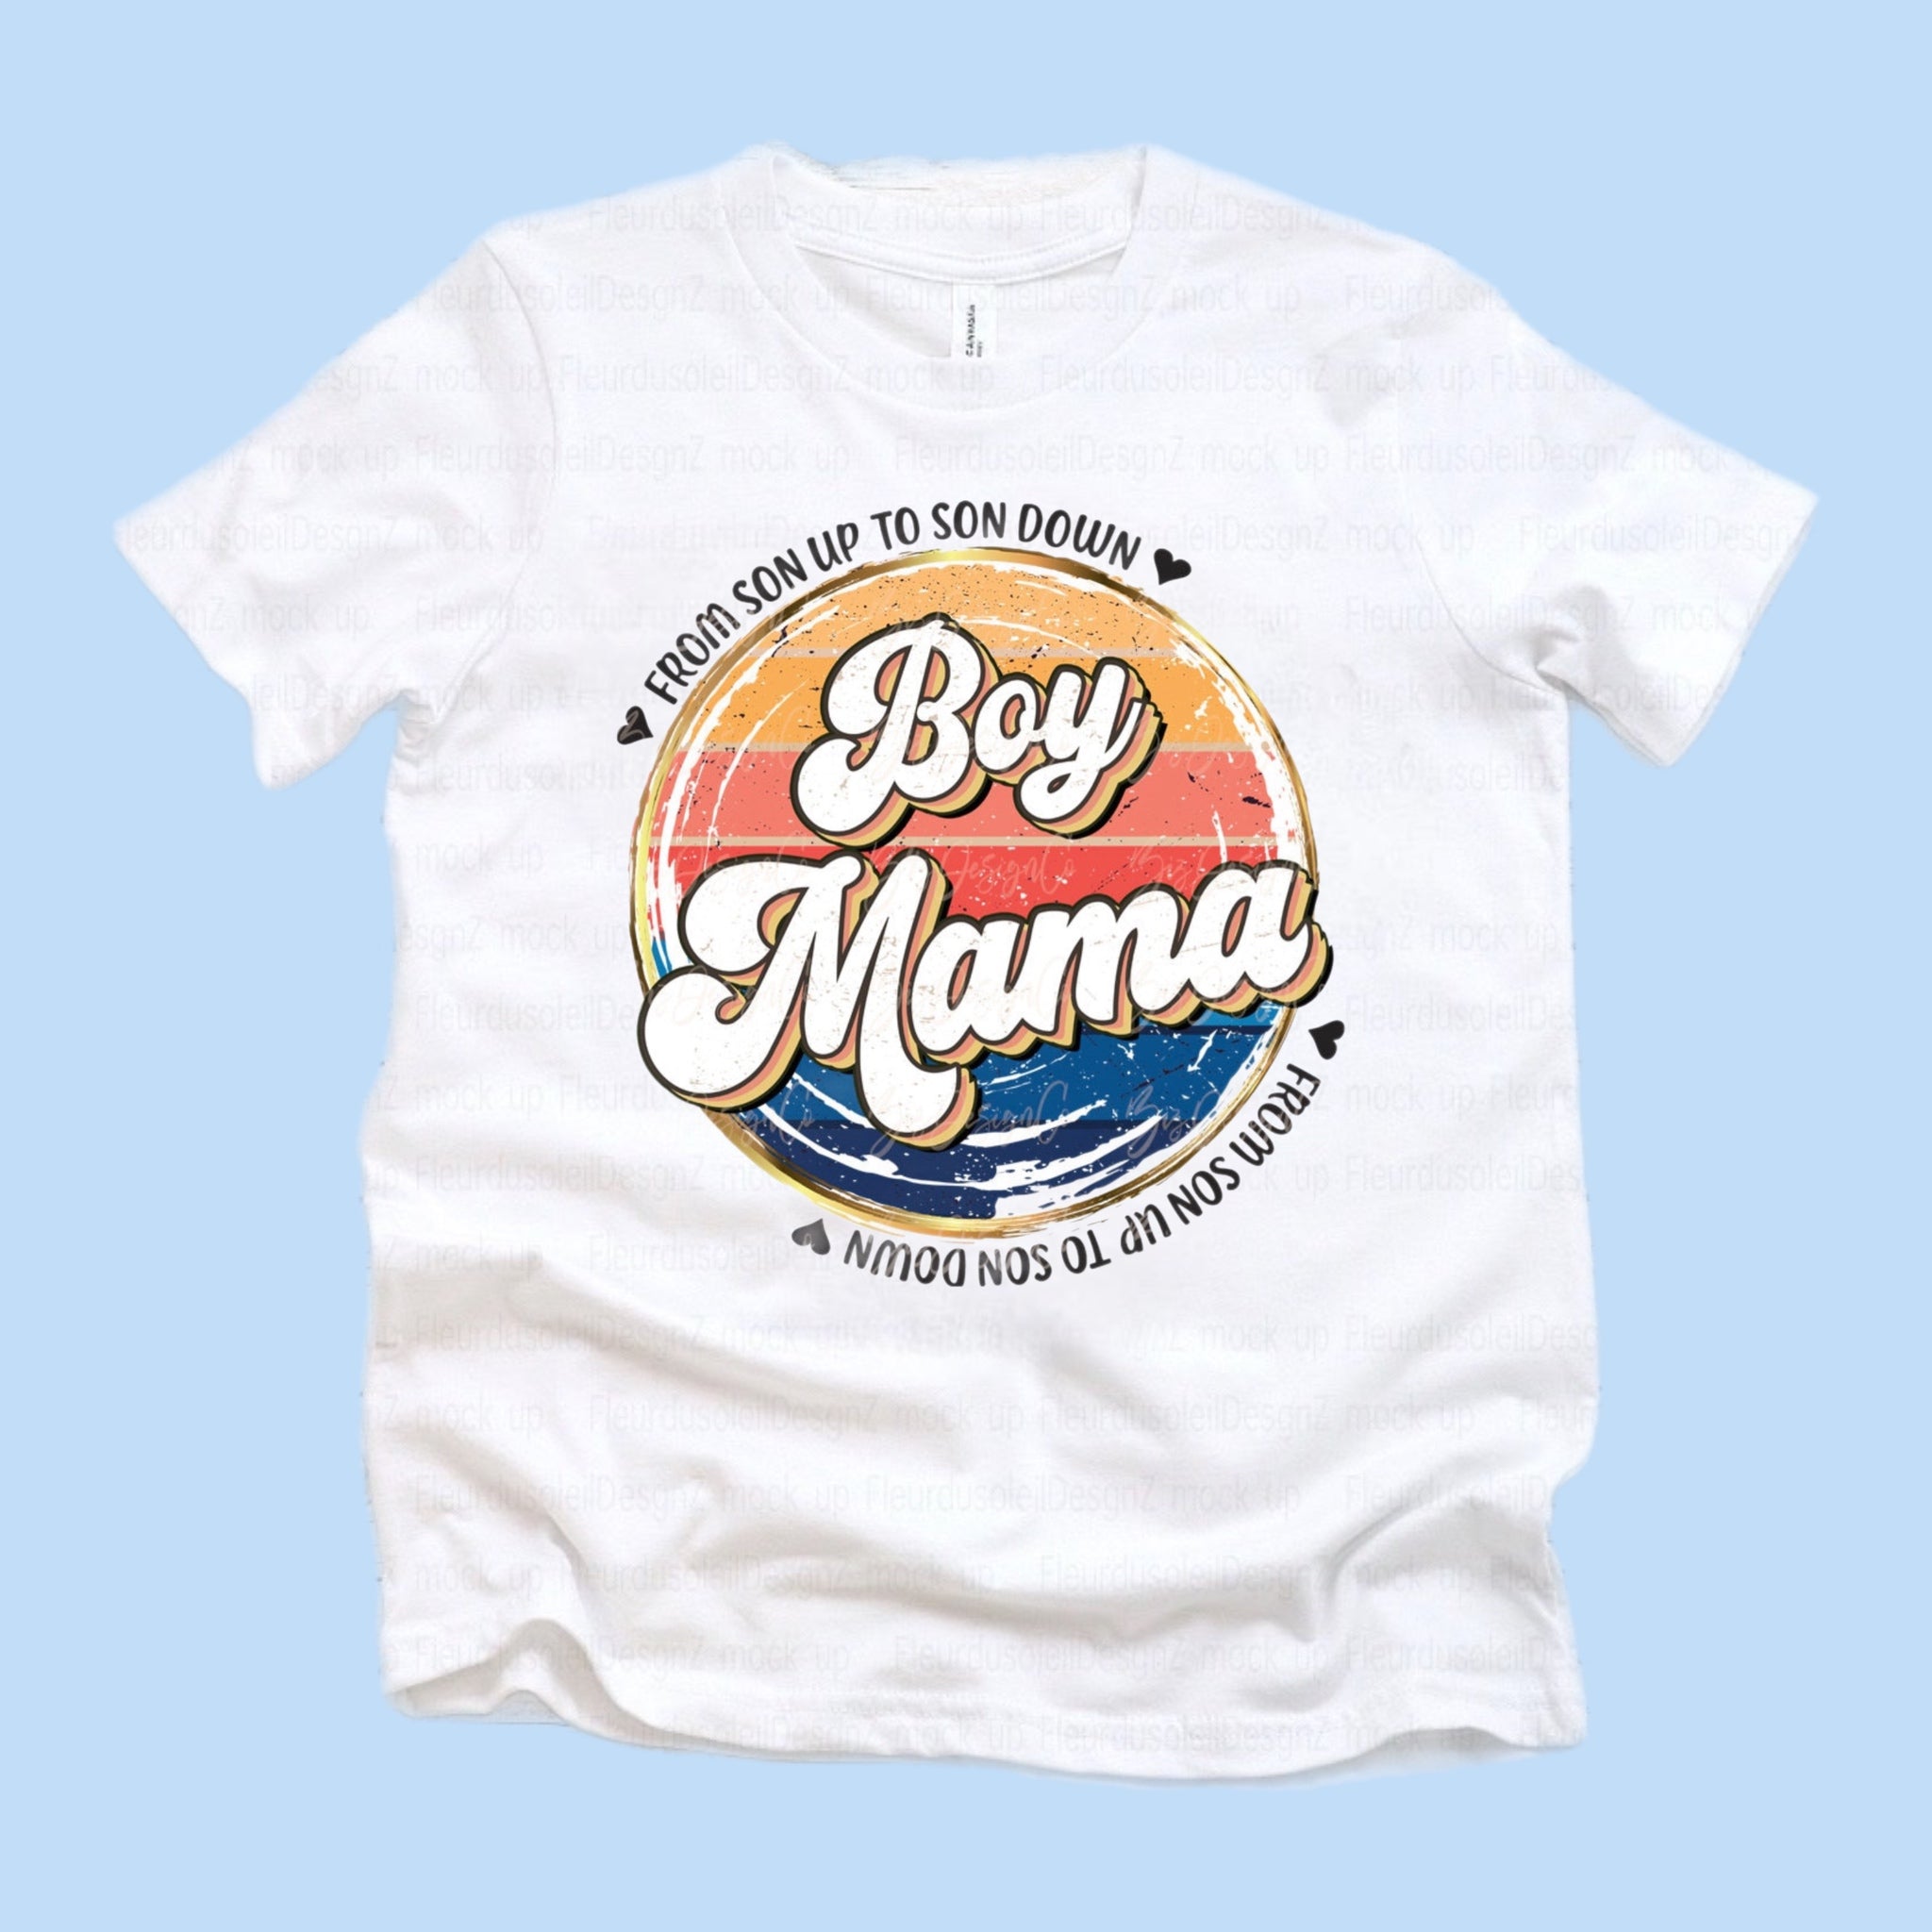 Boy Mama - Son up to son down tee